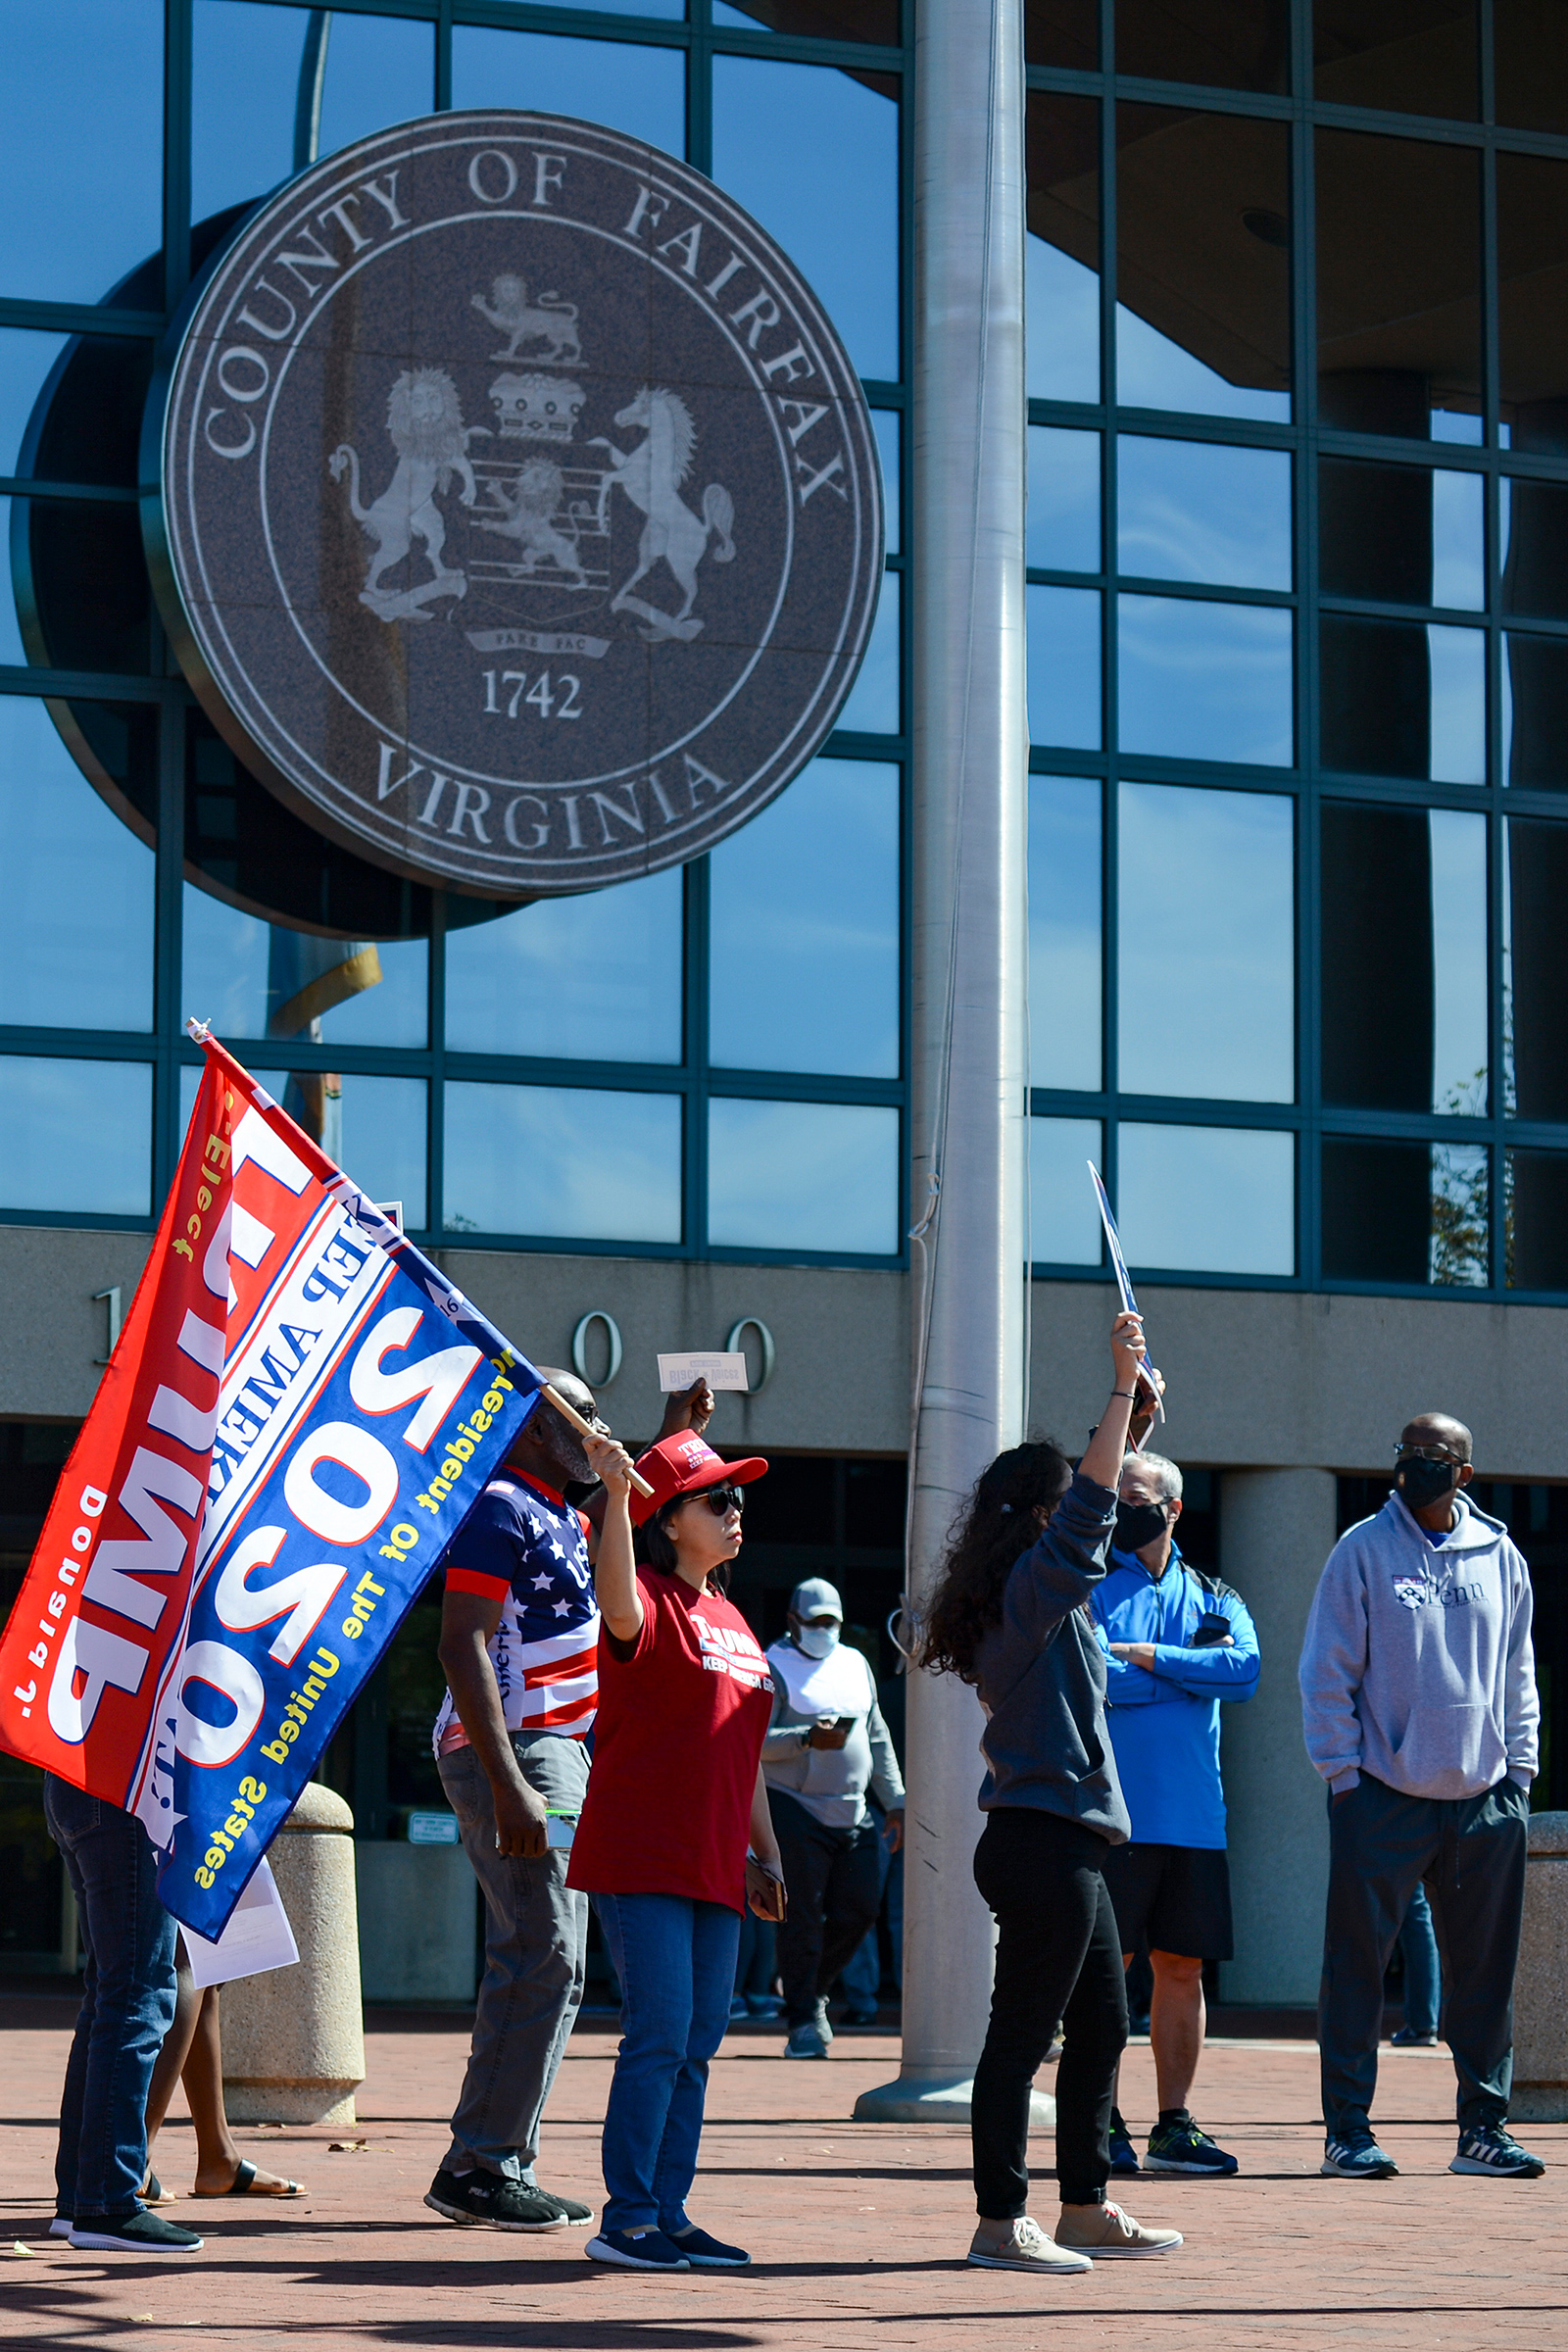 Trump supporters chant, “Four more years,” on Sept. 19 outside the Fairfax County Government Center in Fairfax, Va., disrupting early voting (Kenny Holston—The New York Times/Redux)